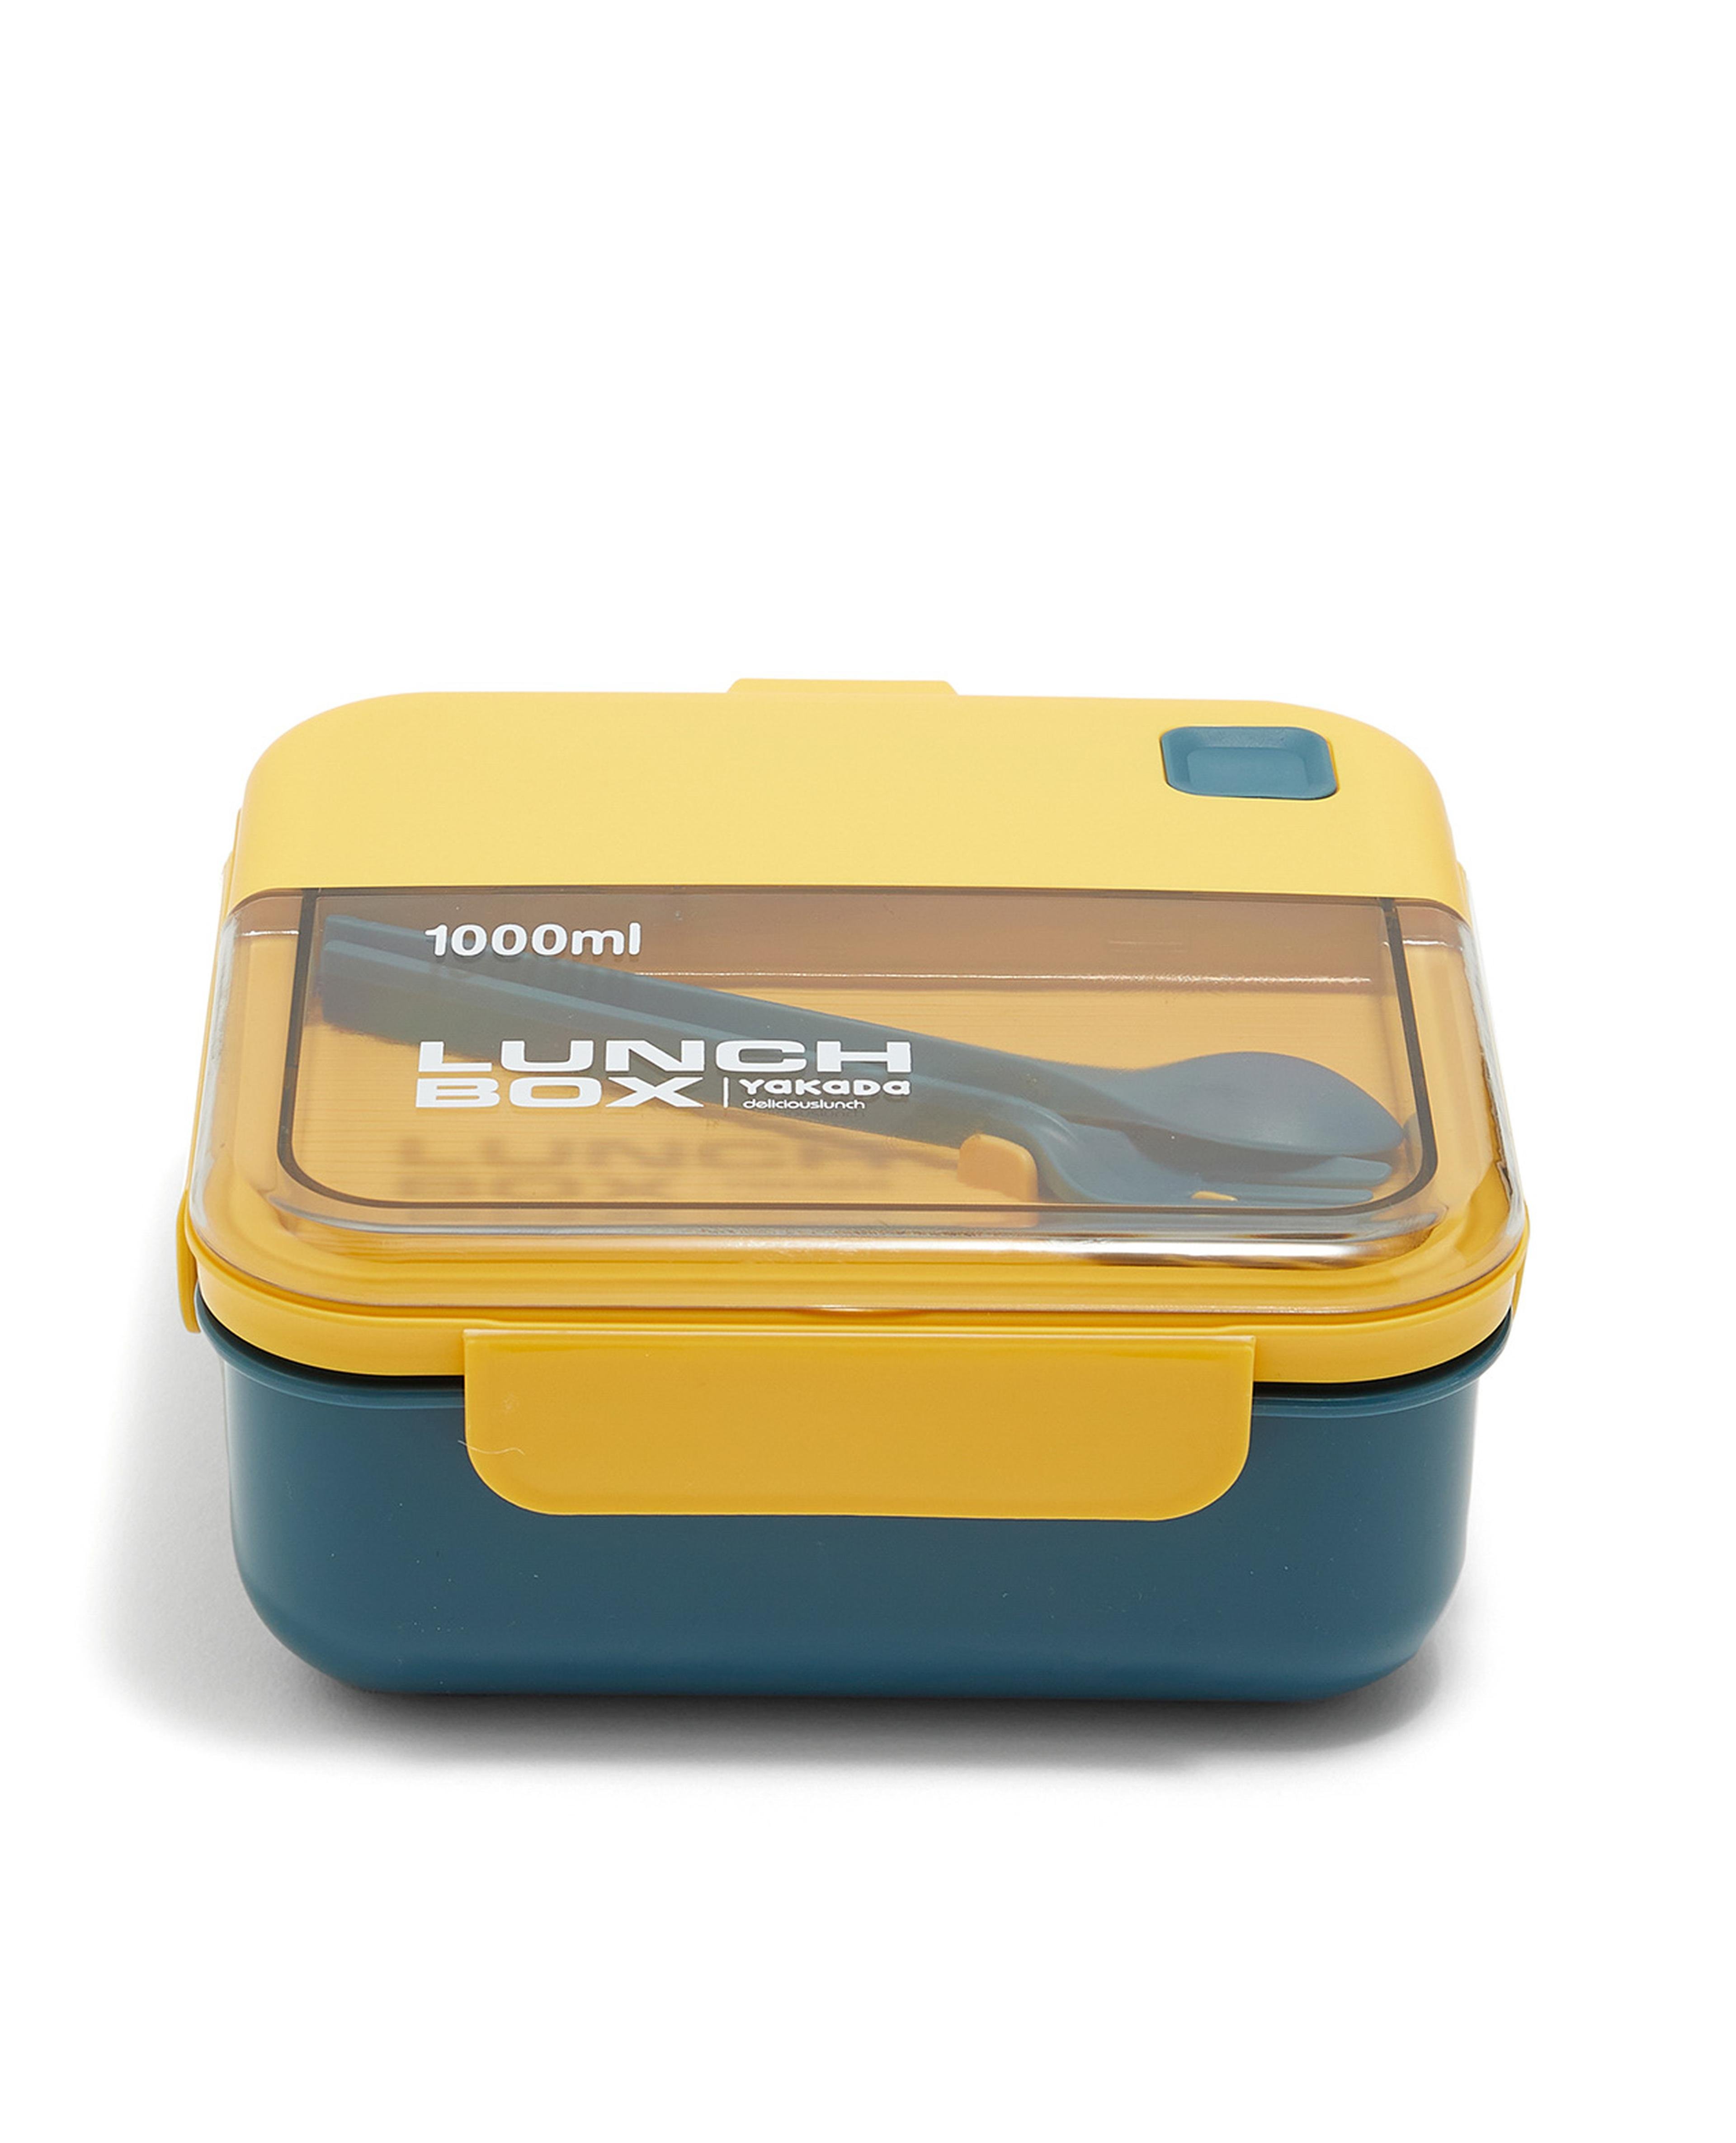 Bento Lunch Box with Cutlery Set, 1100ml